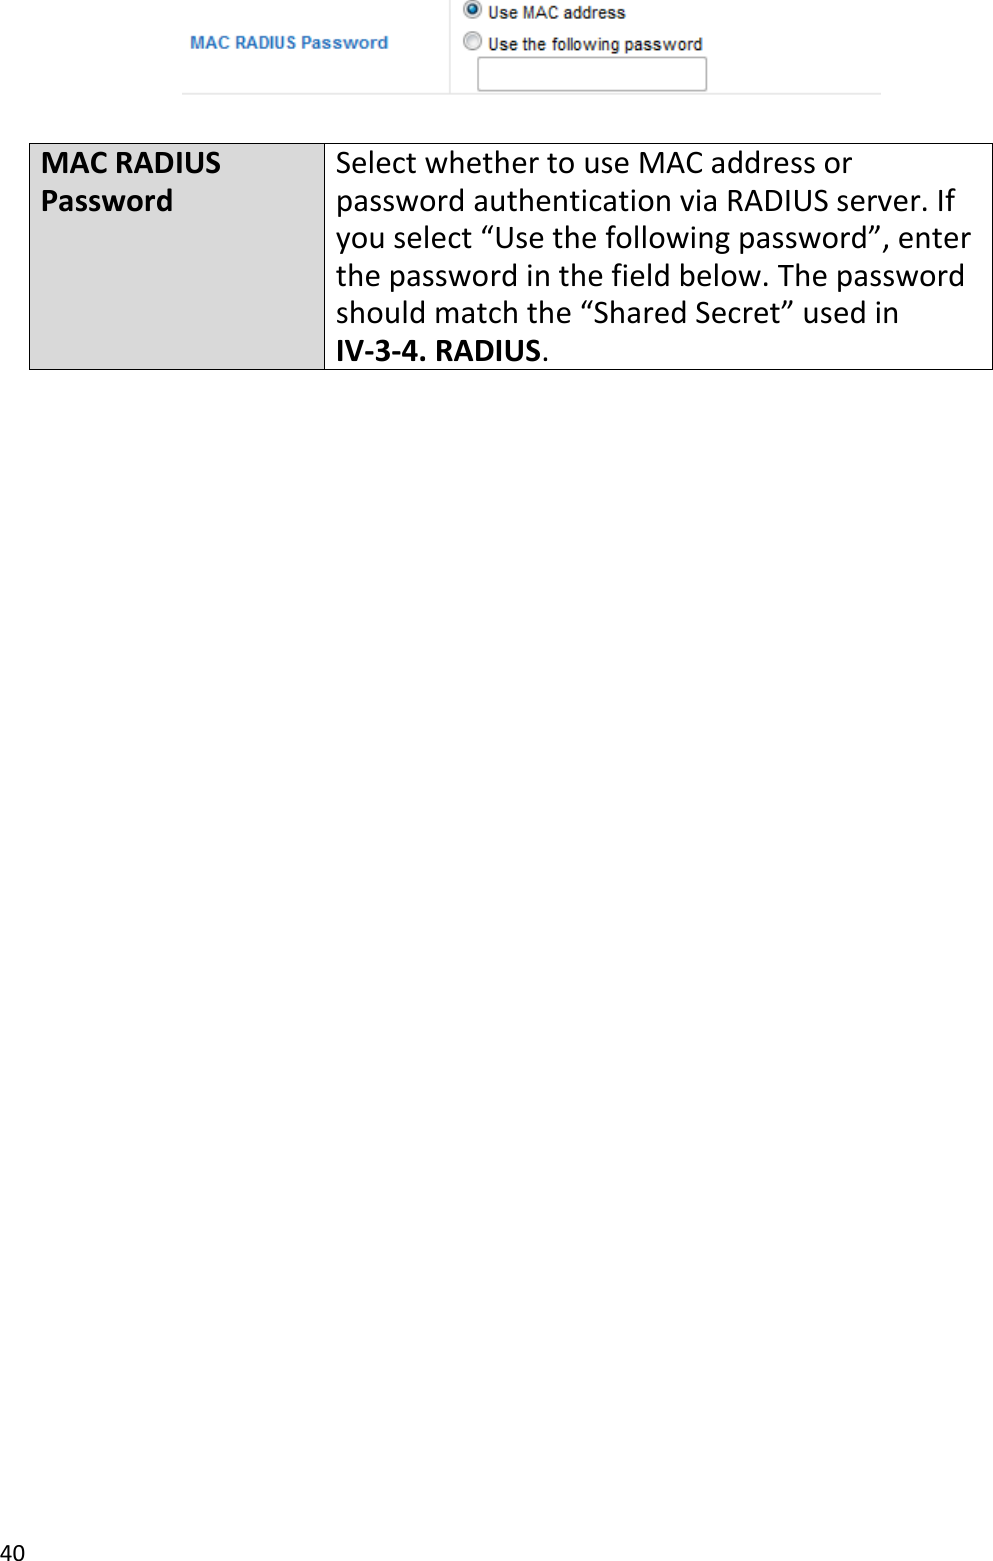 40    MAC RADIUS Password Select whether to use MAC address or password authentication via RADIUS server. If you select “Use the following password”, enter the password in the field below. The password should match the “Shared Secret” used in IV-3-4. RADIUS.     